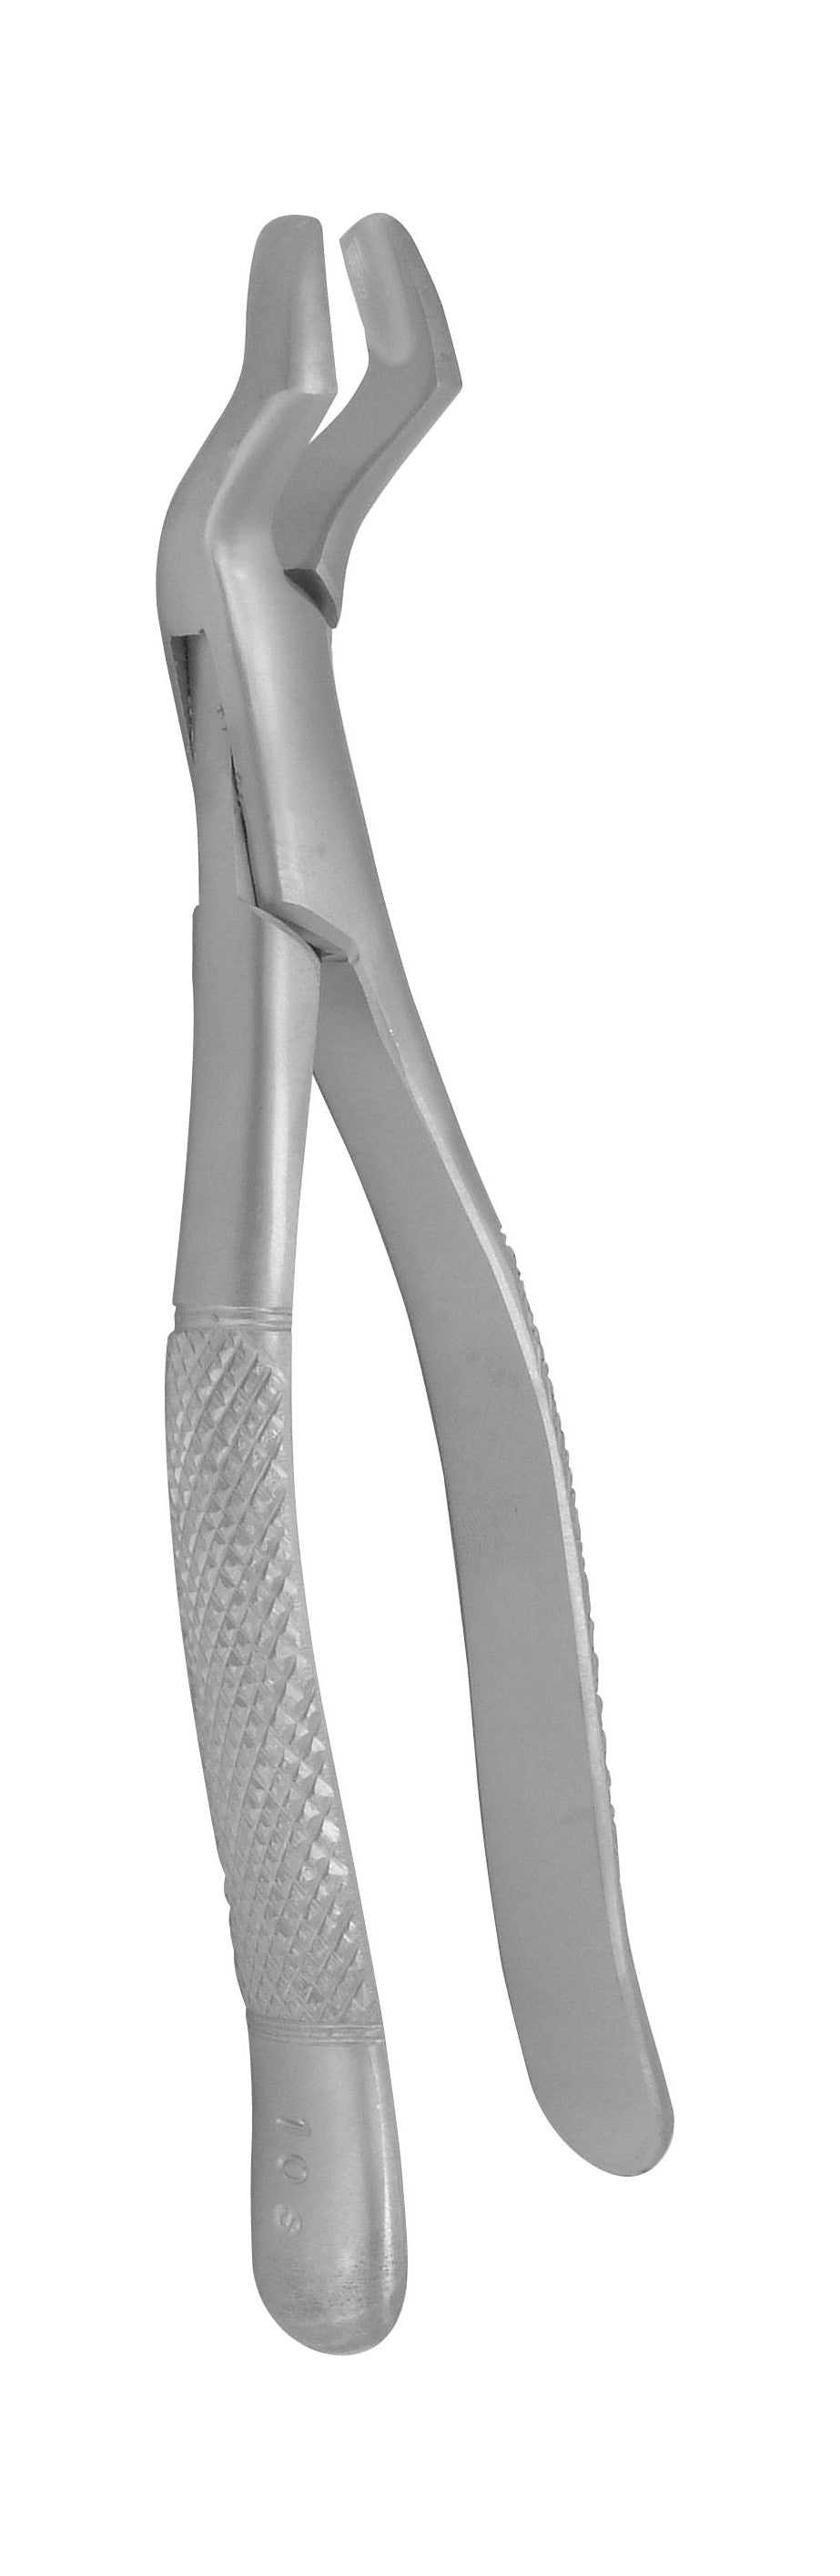 Extraction Forceps 10S